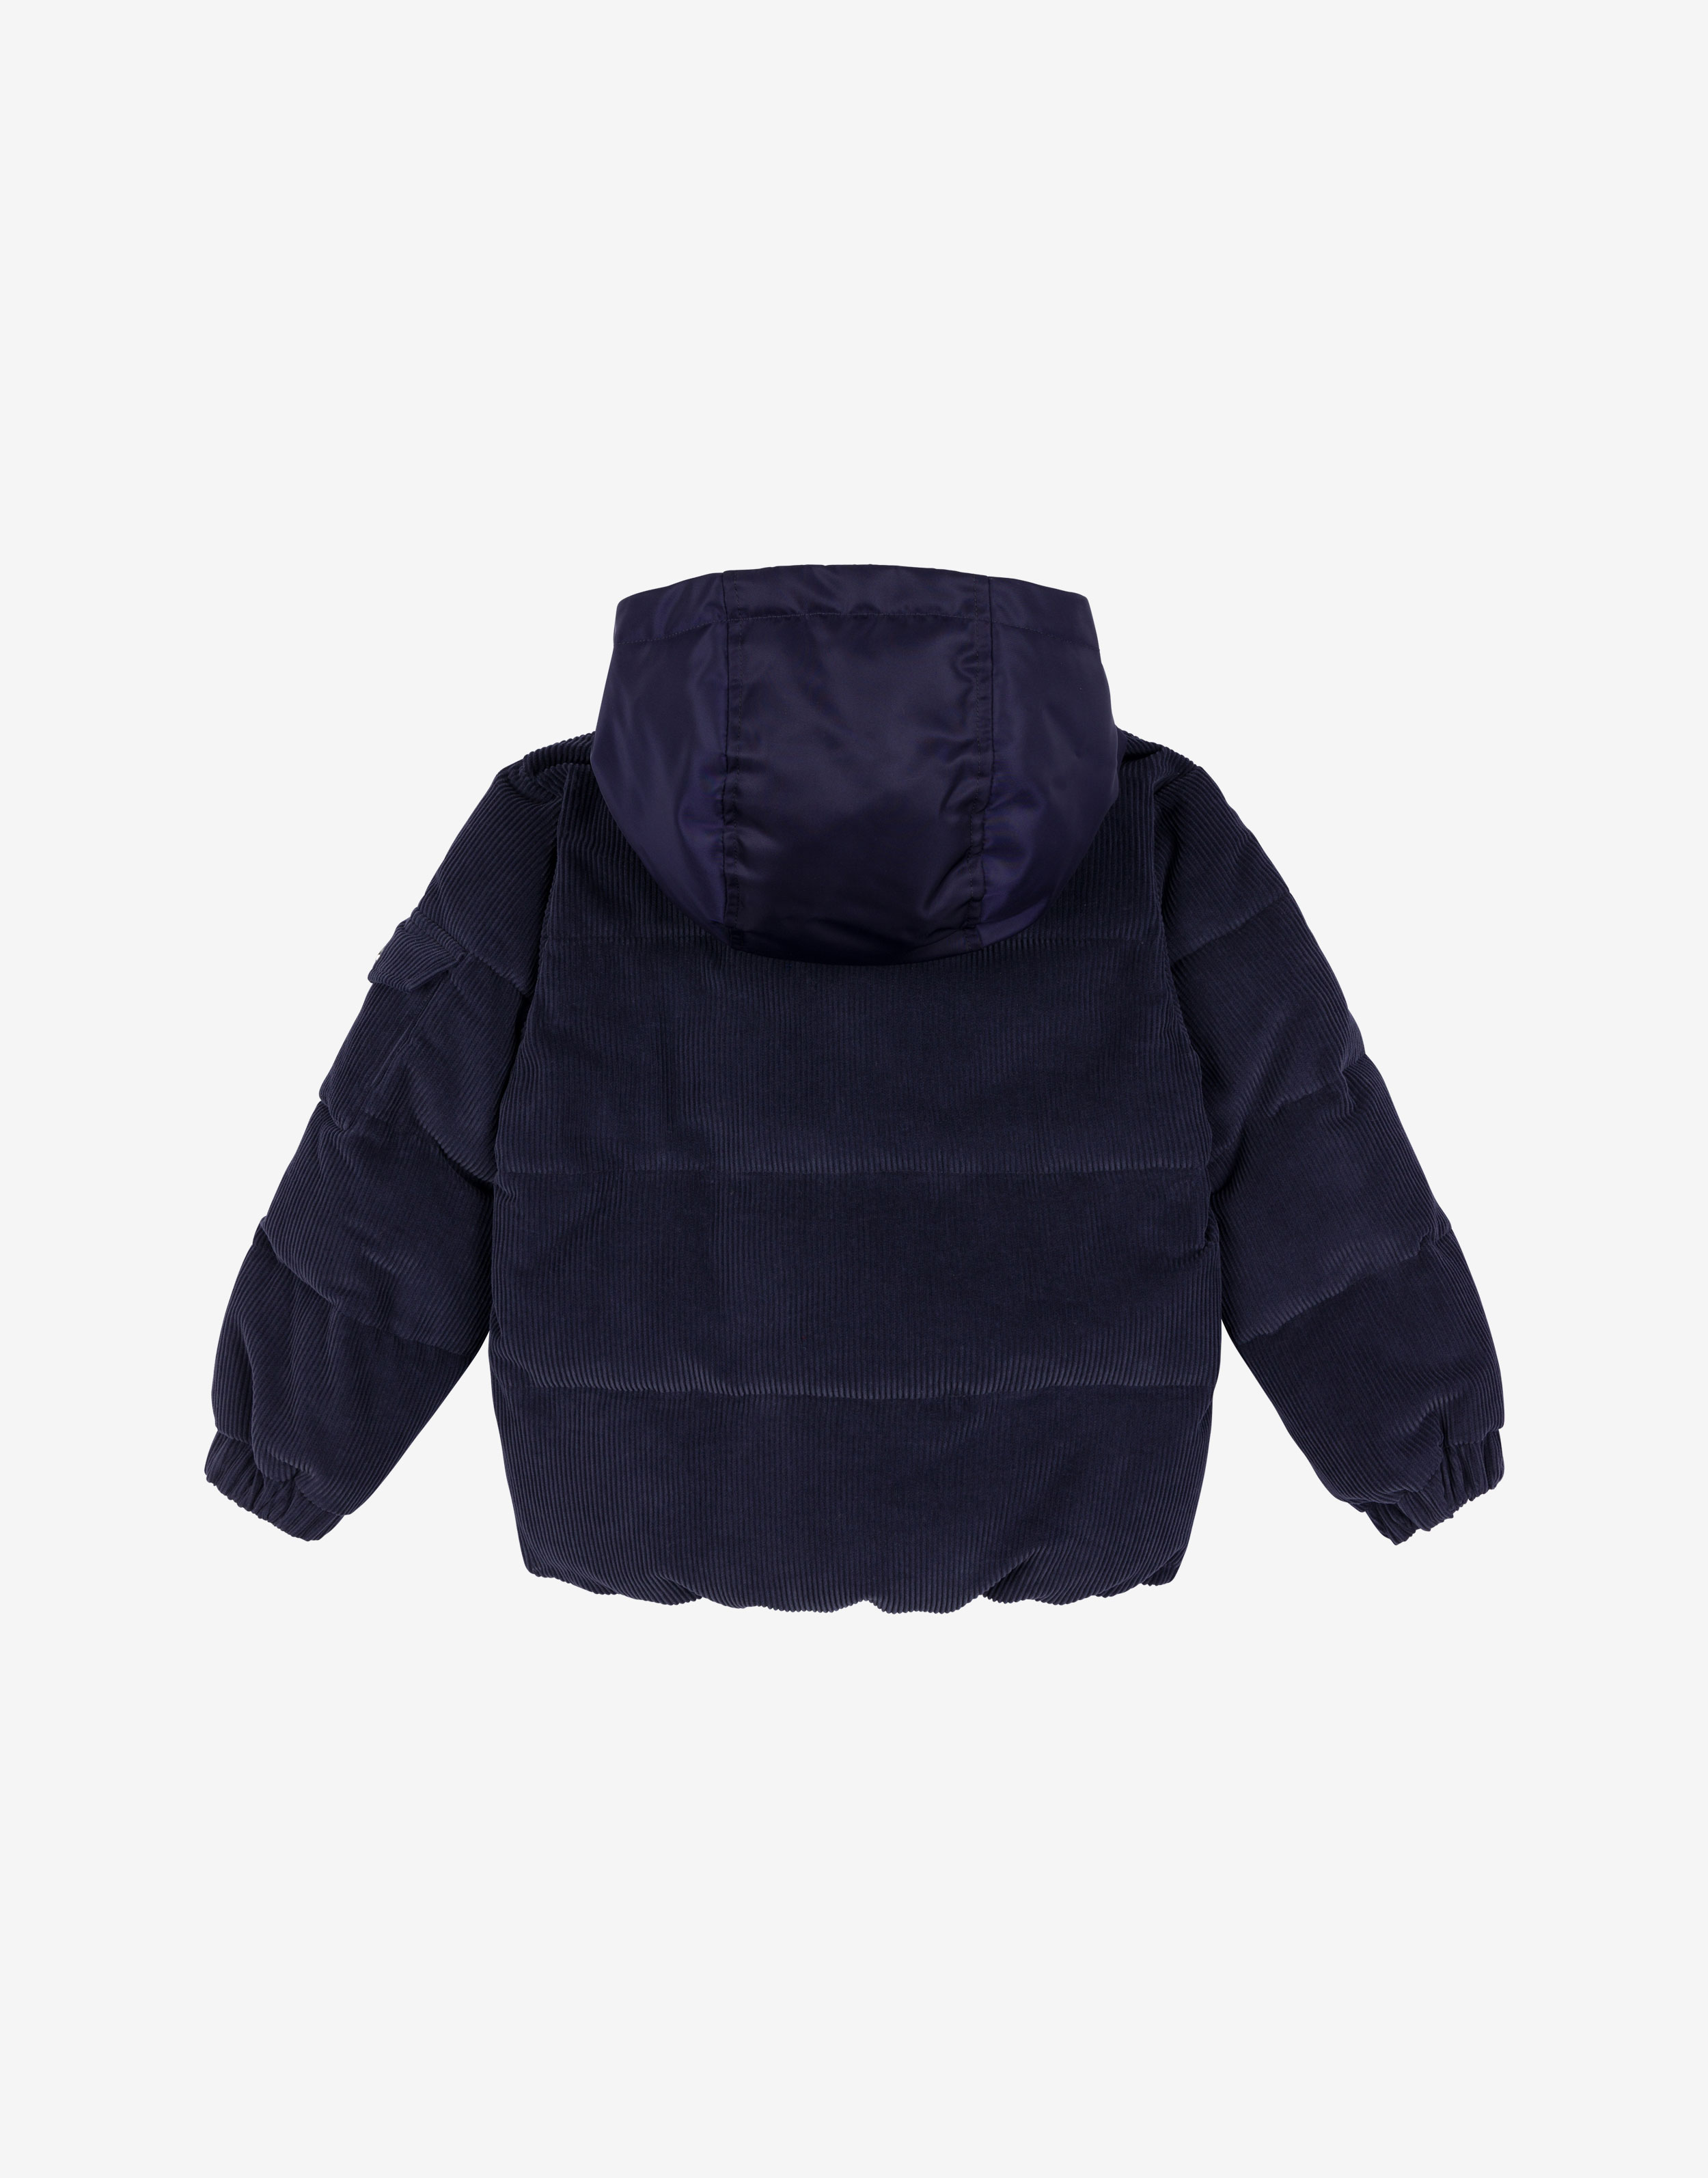 Winter Teddy Patch nylon and corduroy down jacket